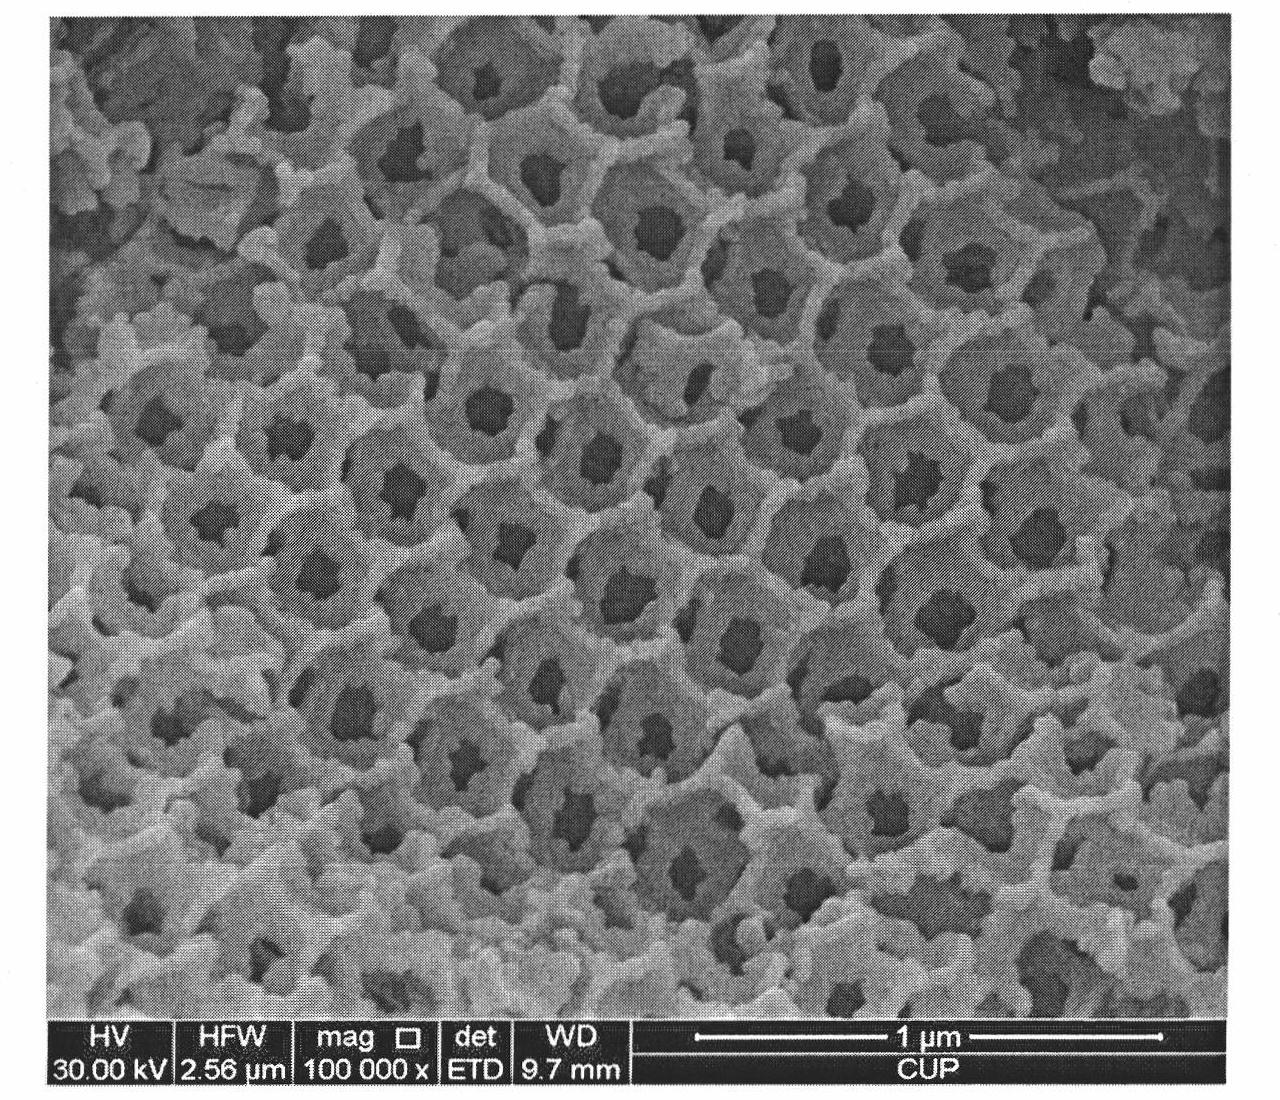 Catalyst of three-dimensional ordered macroporous cerium-based oxide supported gold for purifying diesel soot